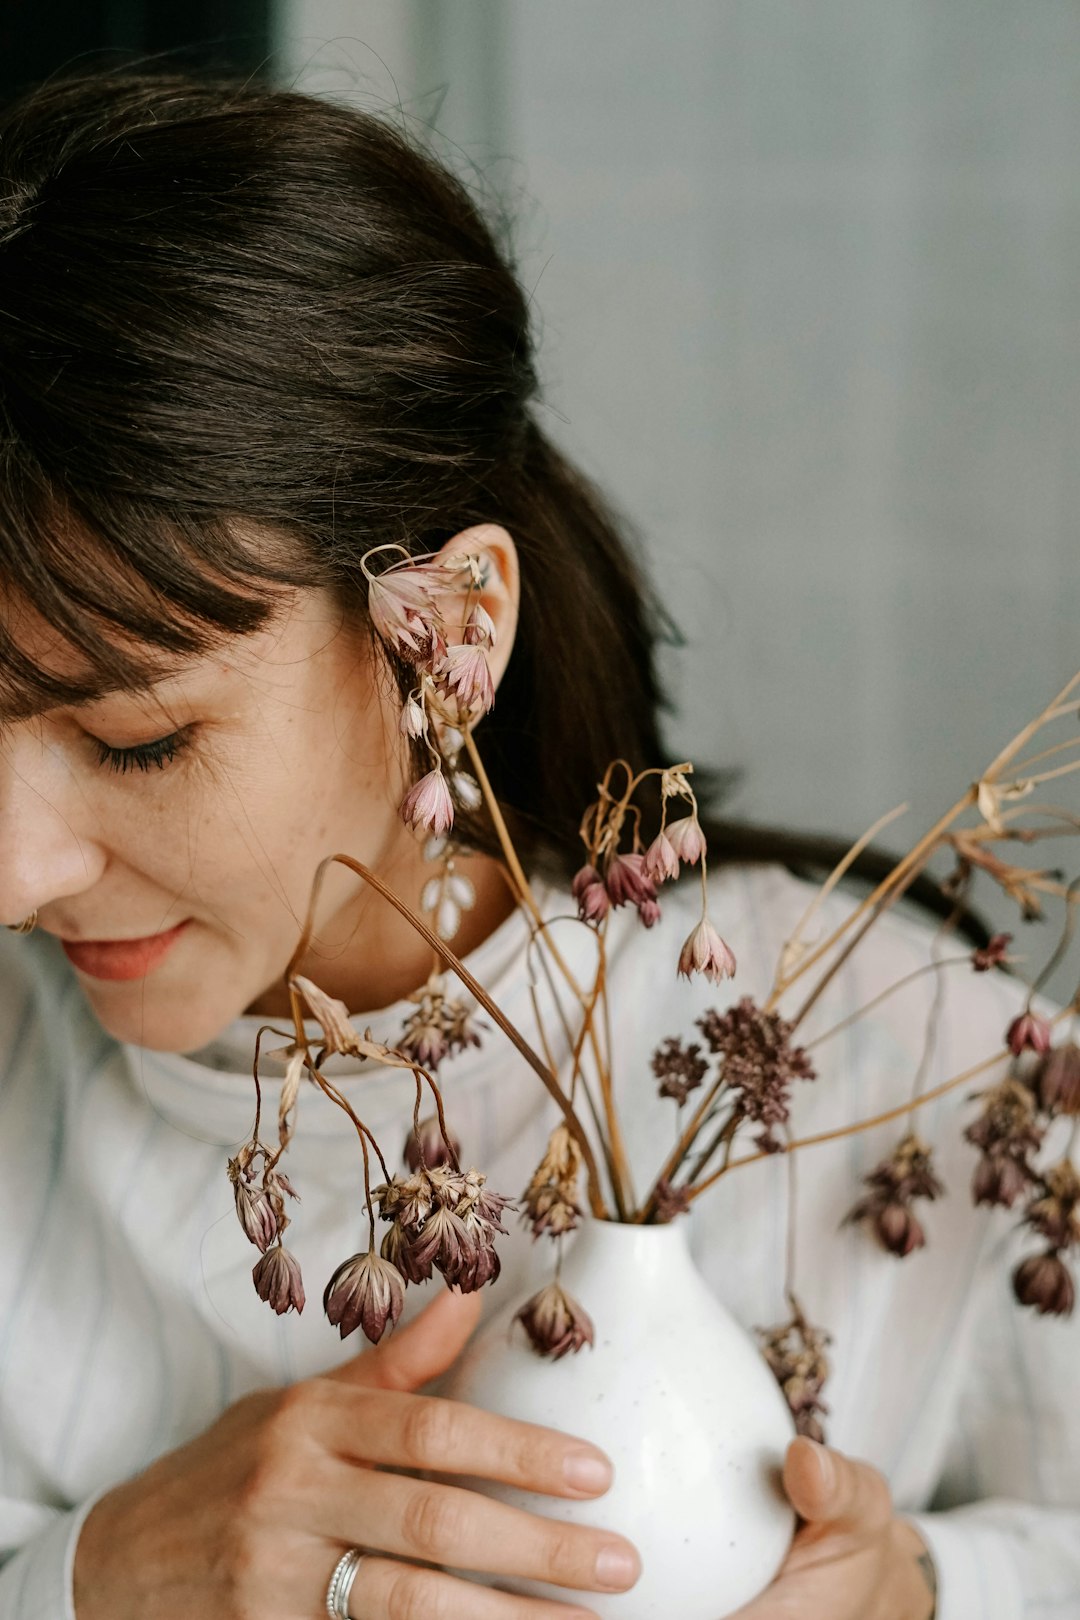 woman in white shirt with white flowers on her ear